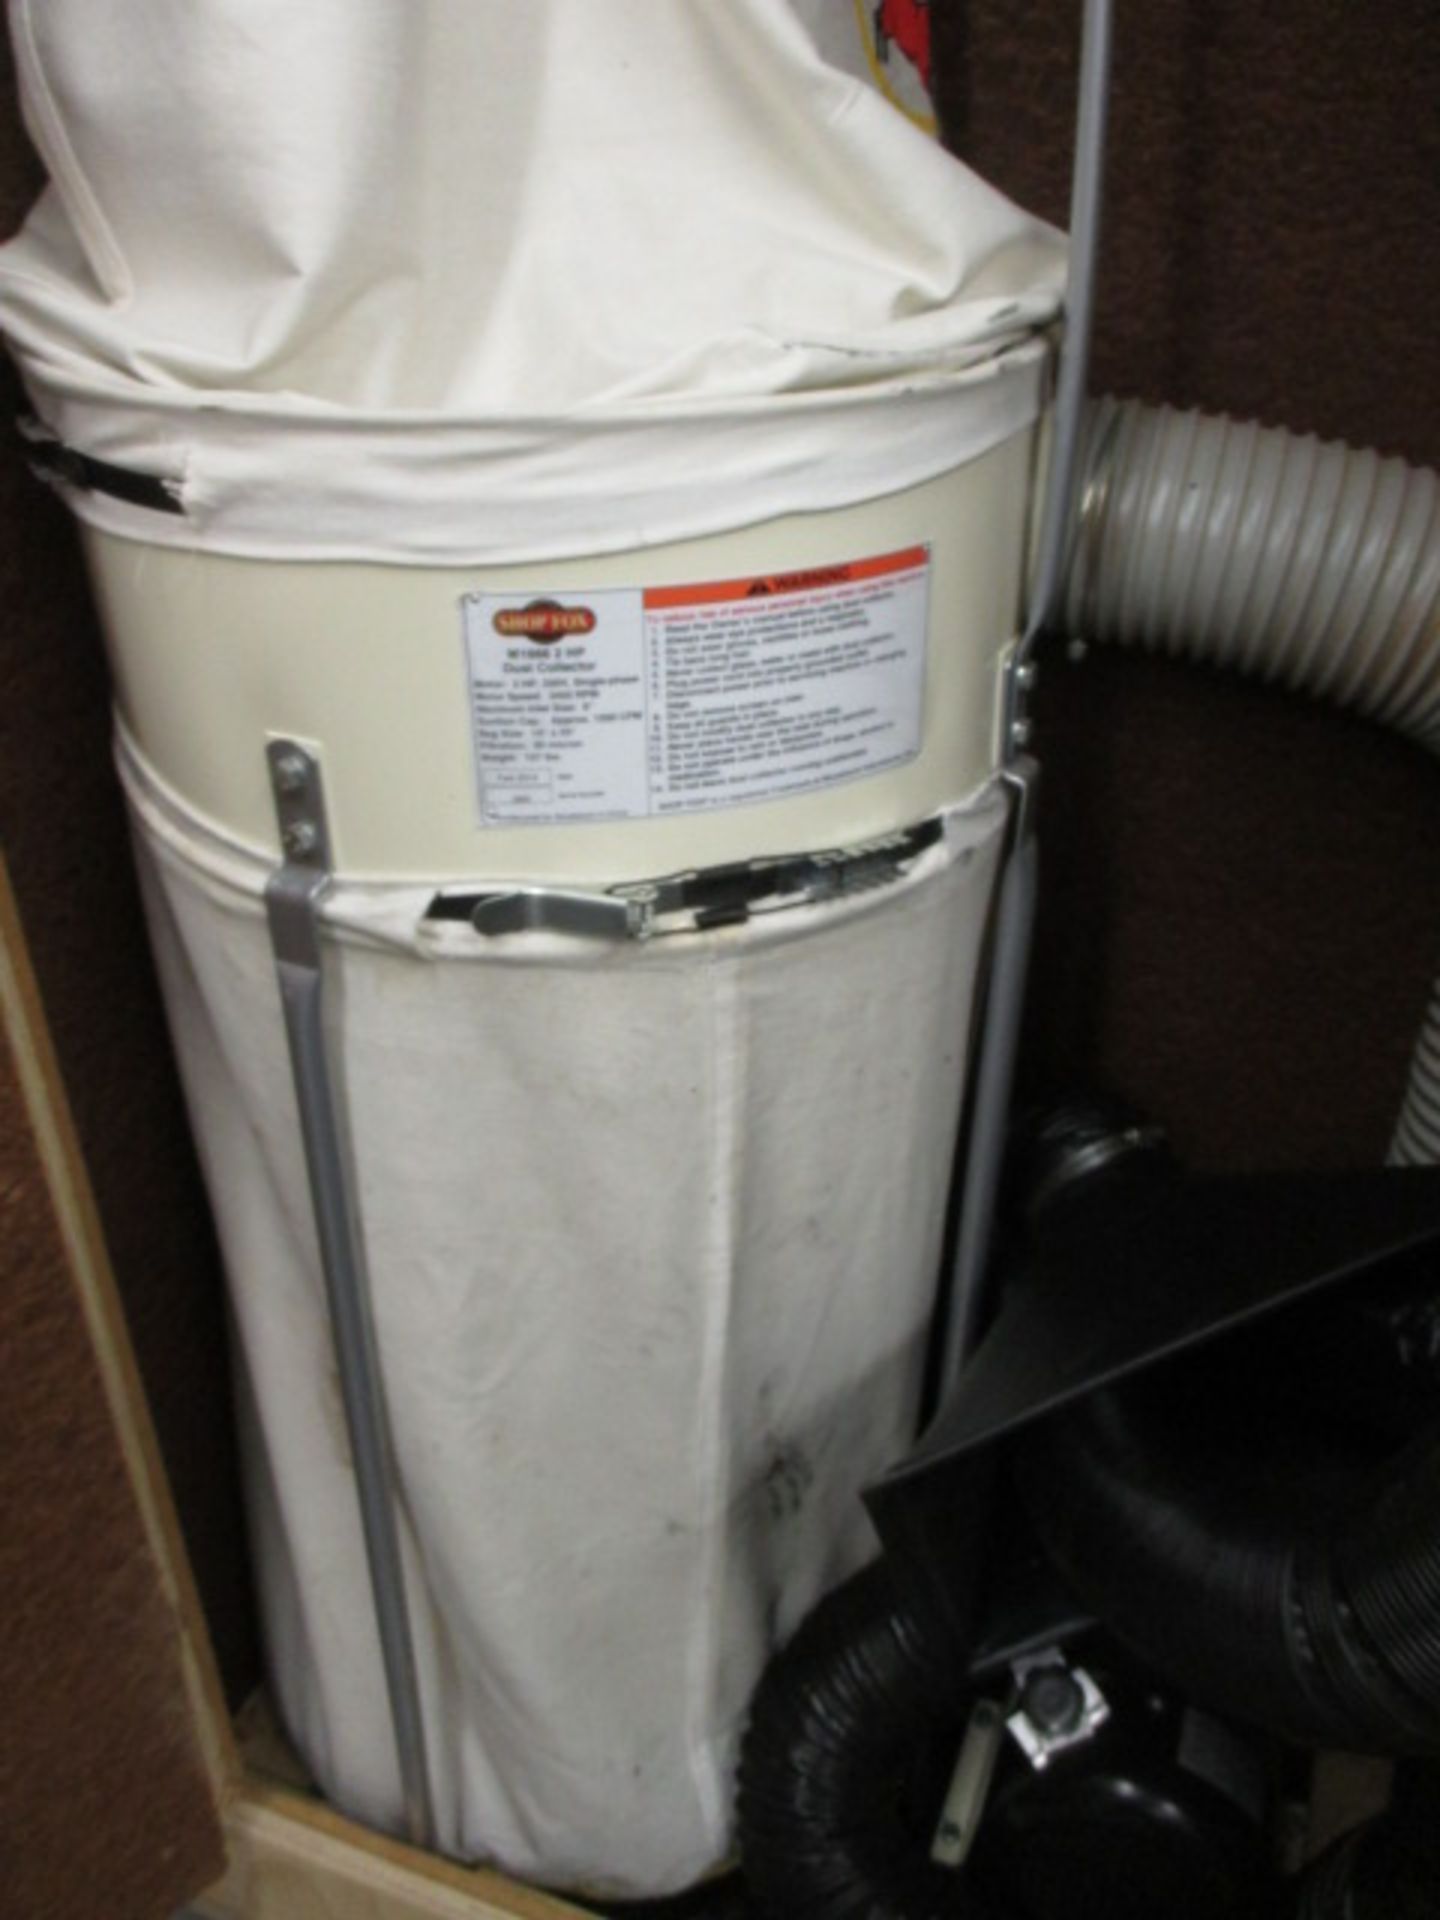 Dust Collector. 2014 Shop Fox W1666 2HP Dust Collector. Inlet Size: 6", Suction: Approx. 1550 CFM, - Image 2 of 2